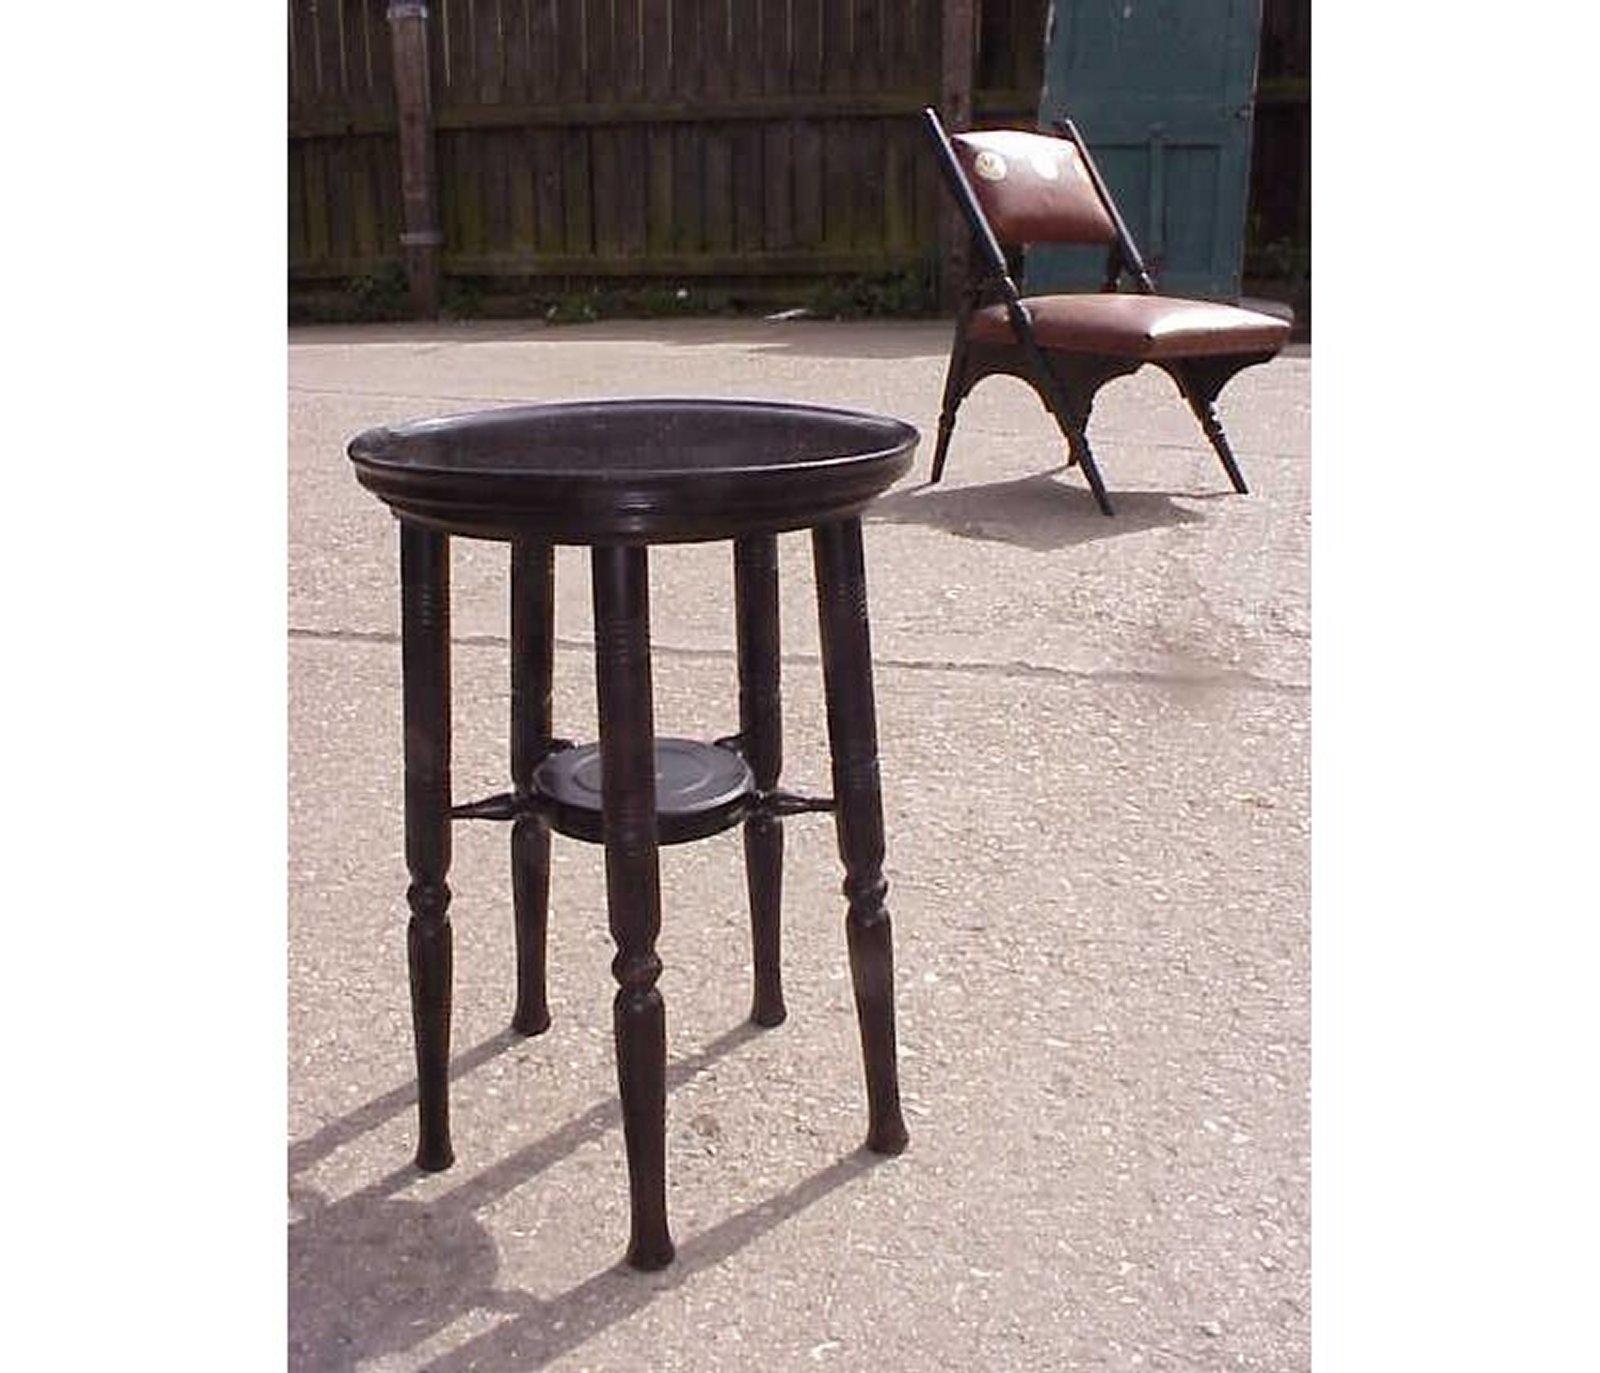 Walnut E W Godwin Attri. Aesthetic Movement Circular Wine or Side Table with Five Legs. For Sale